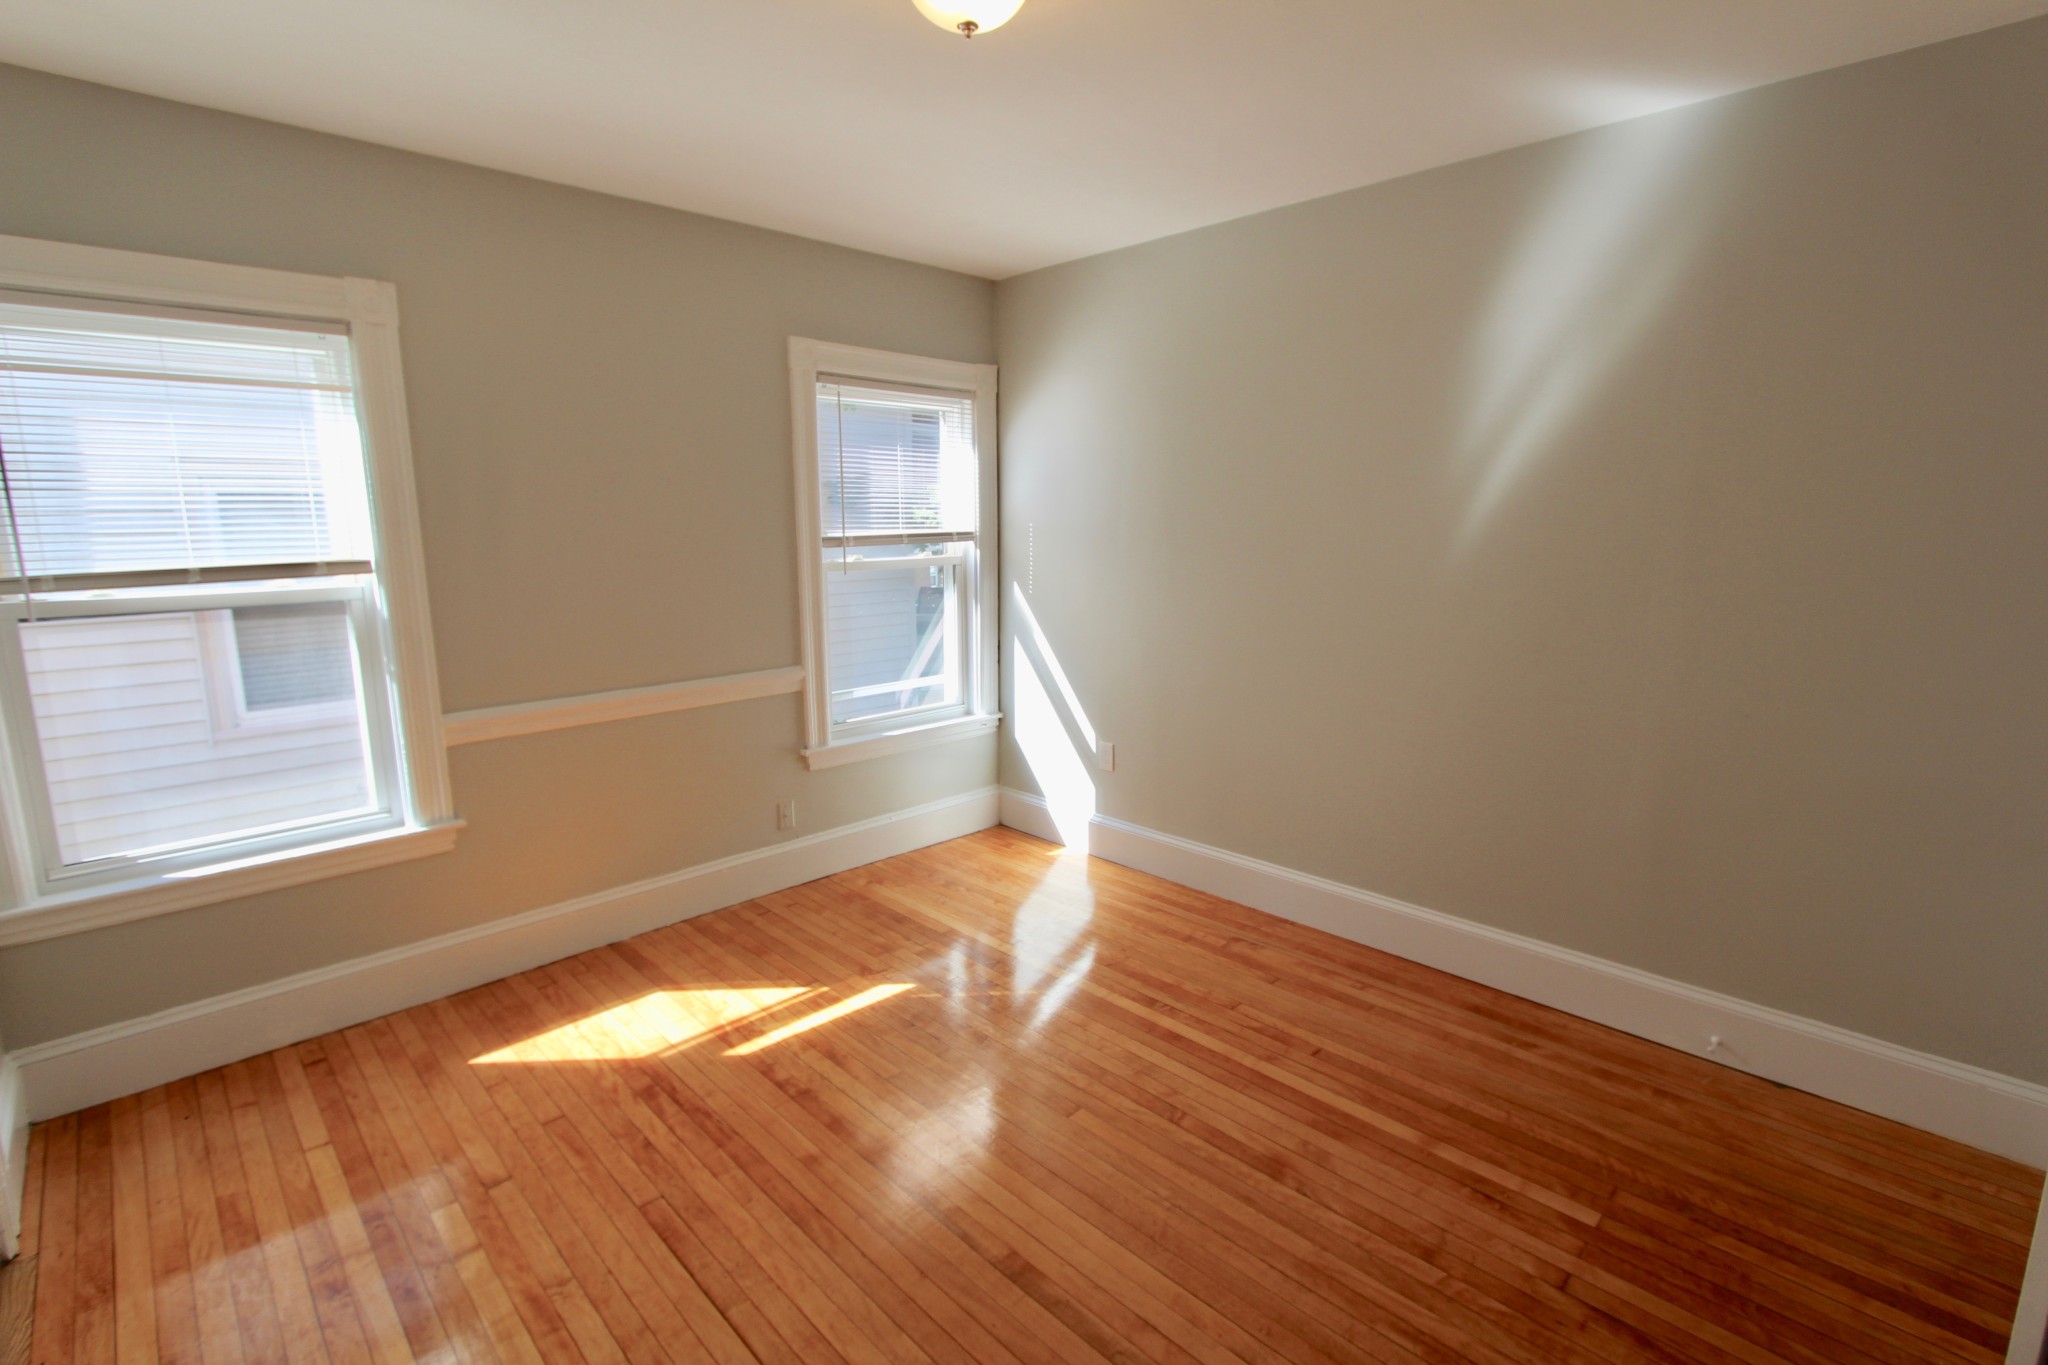 Photos of apartment on Russell st.,Malden MA 02148